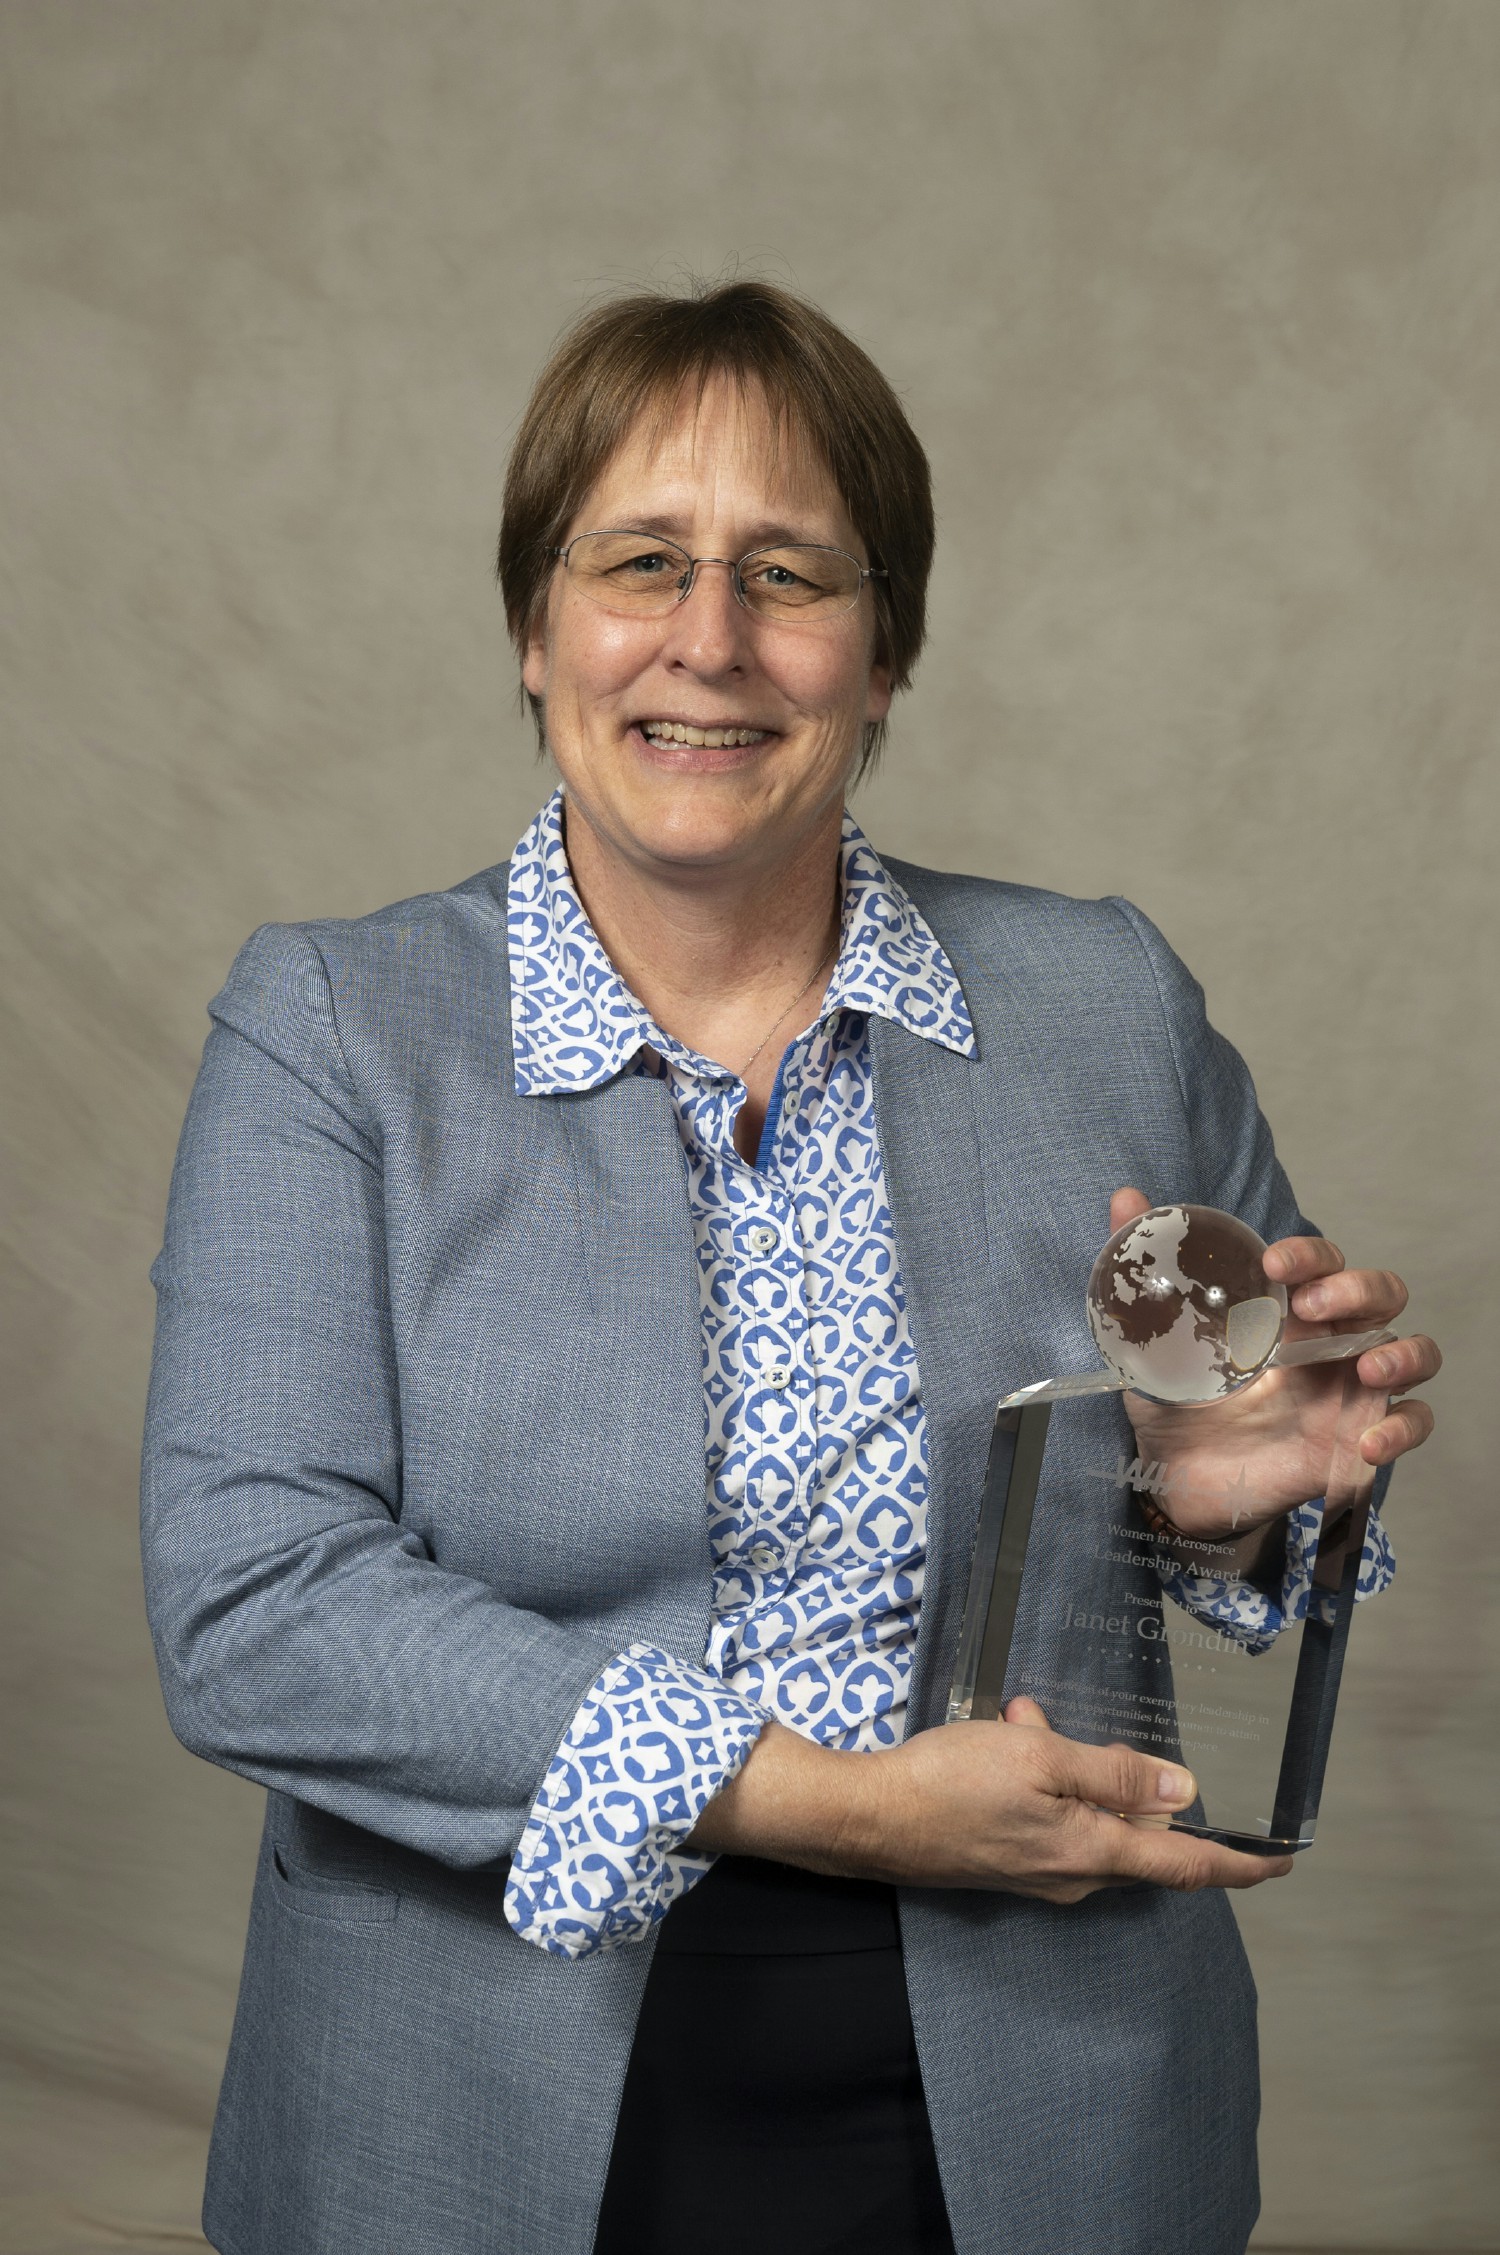 CEO Janet Grondin recognized with Leadership Award from Women in Aerospace